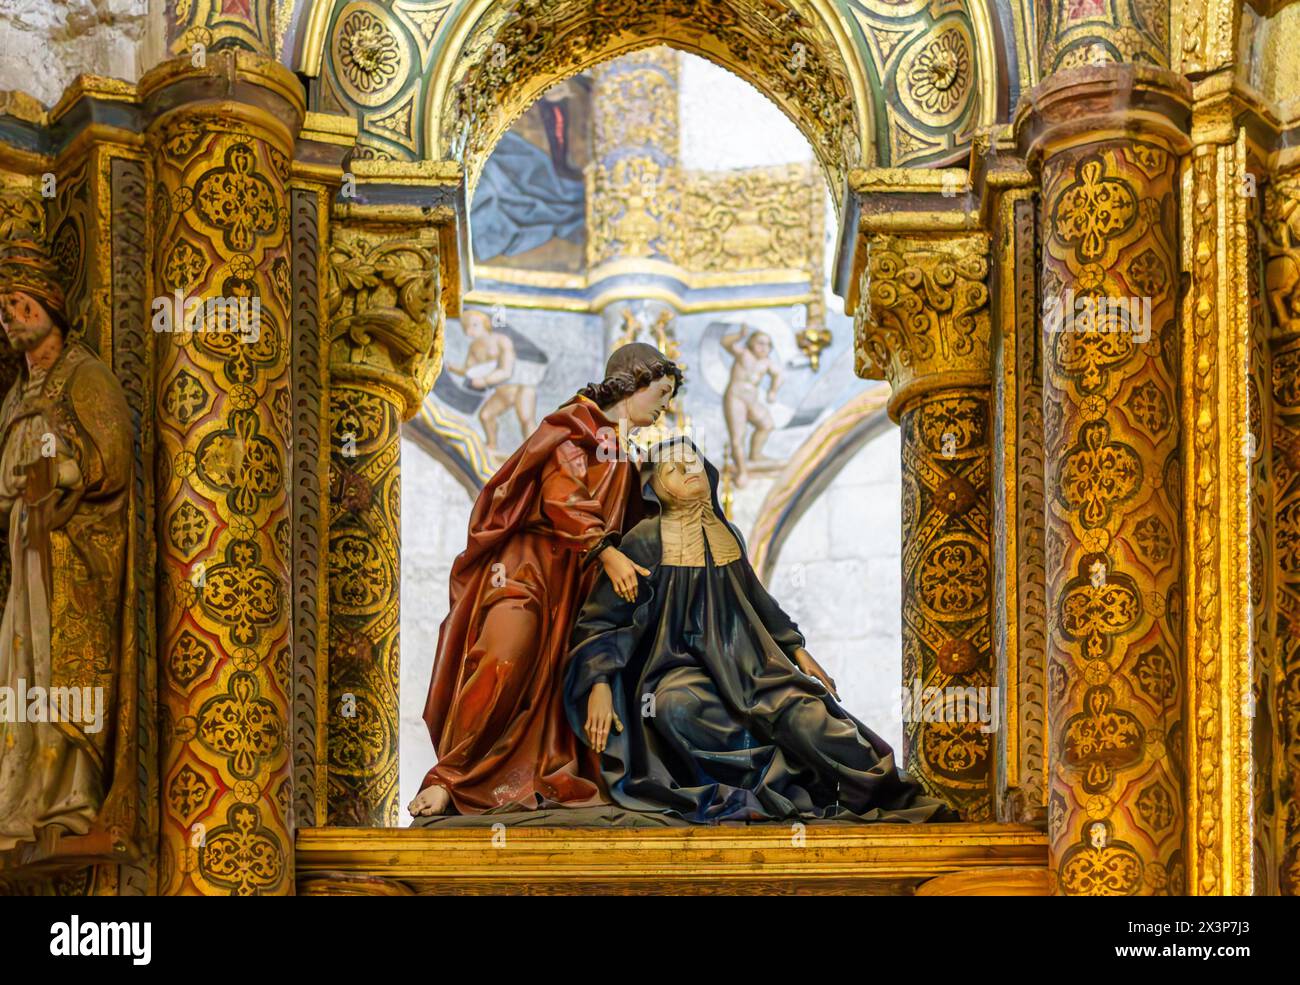 Gilt and ornate decorations in the rotunda at Convent of Christ, Tomar, Portugal Stock Photo